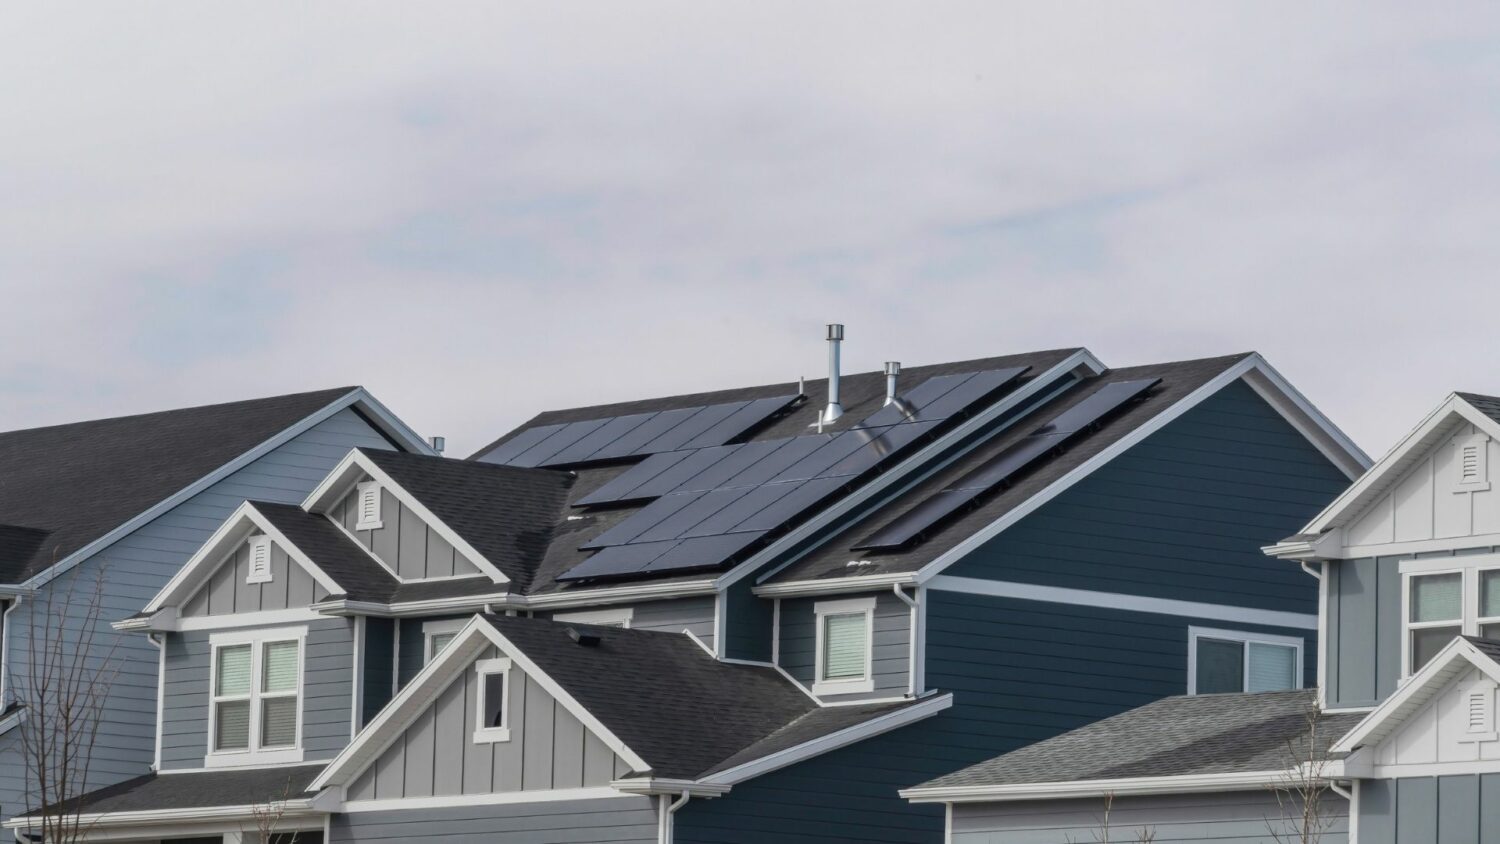 7 Questions To Ask When Going Solar